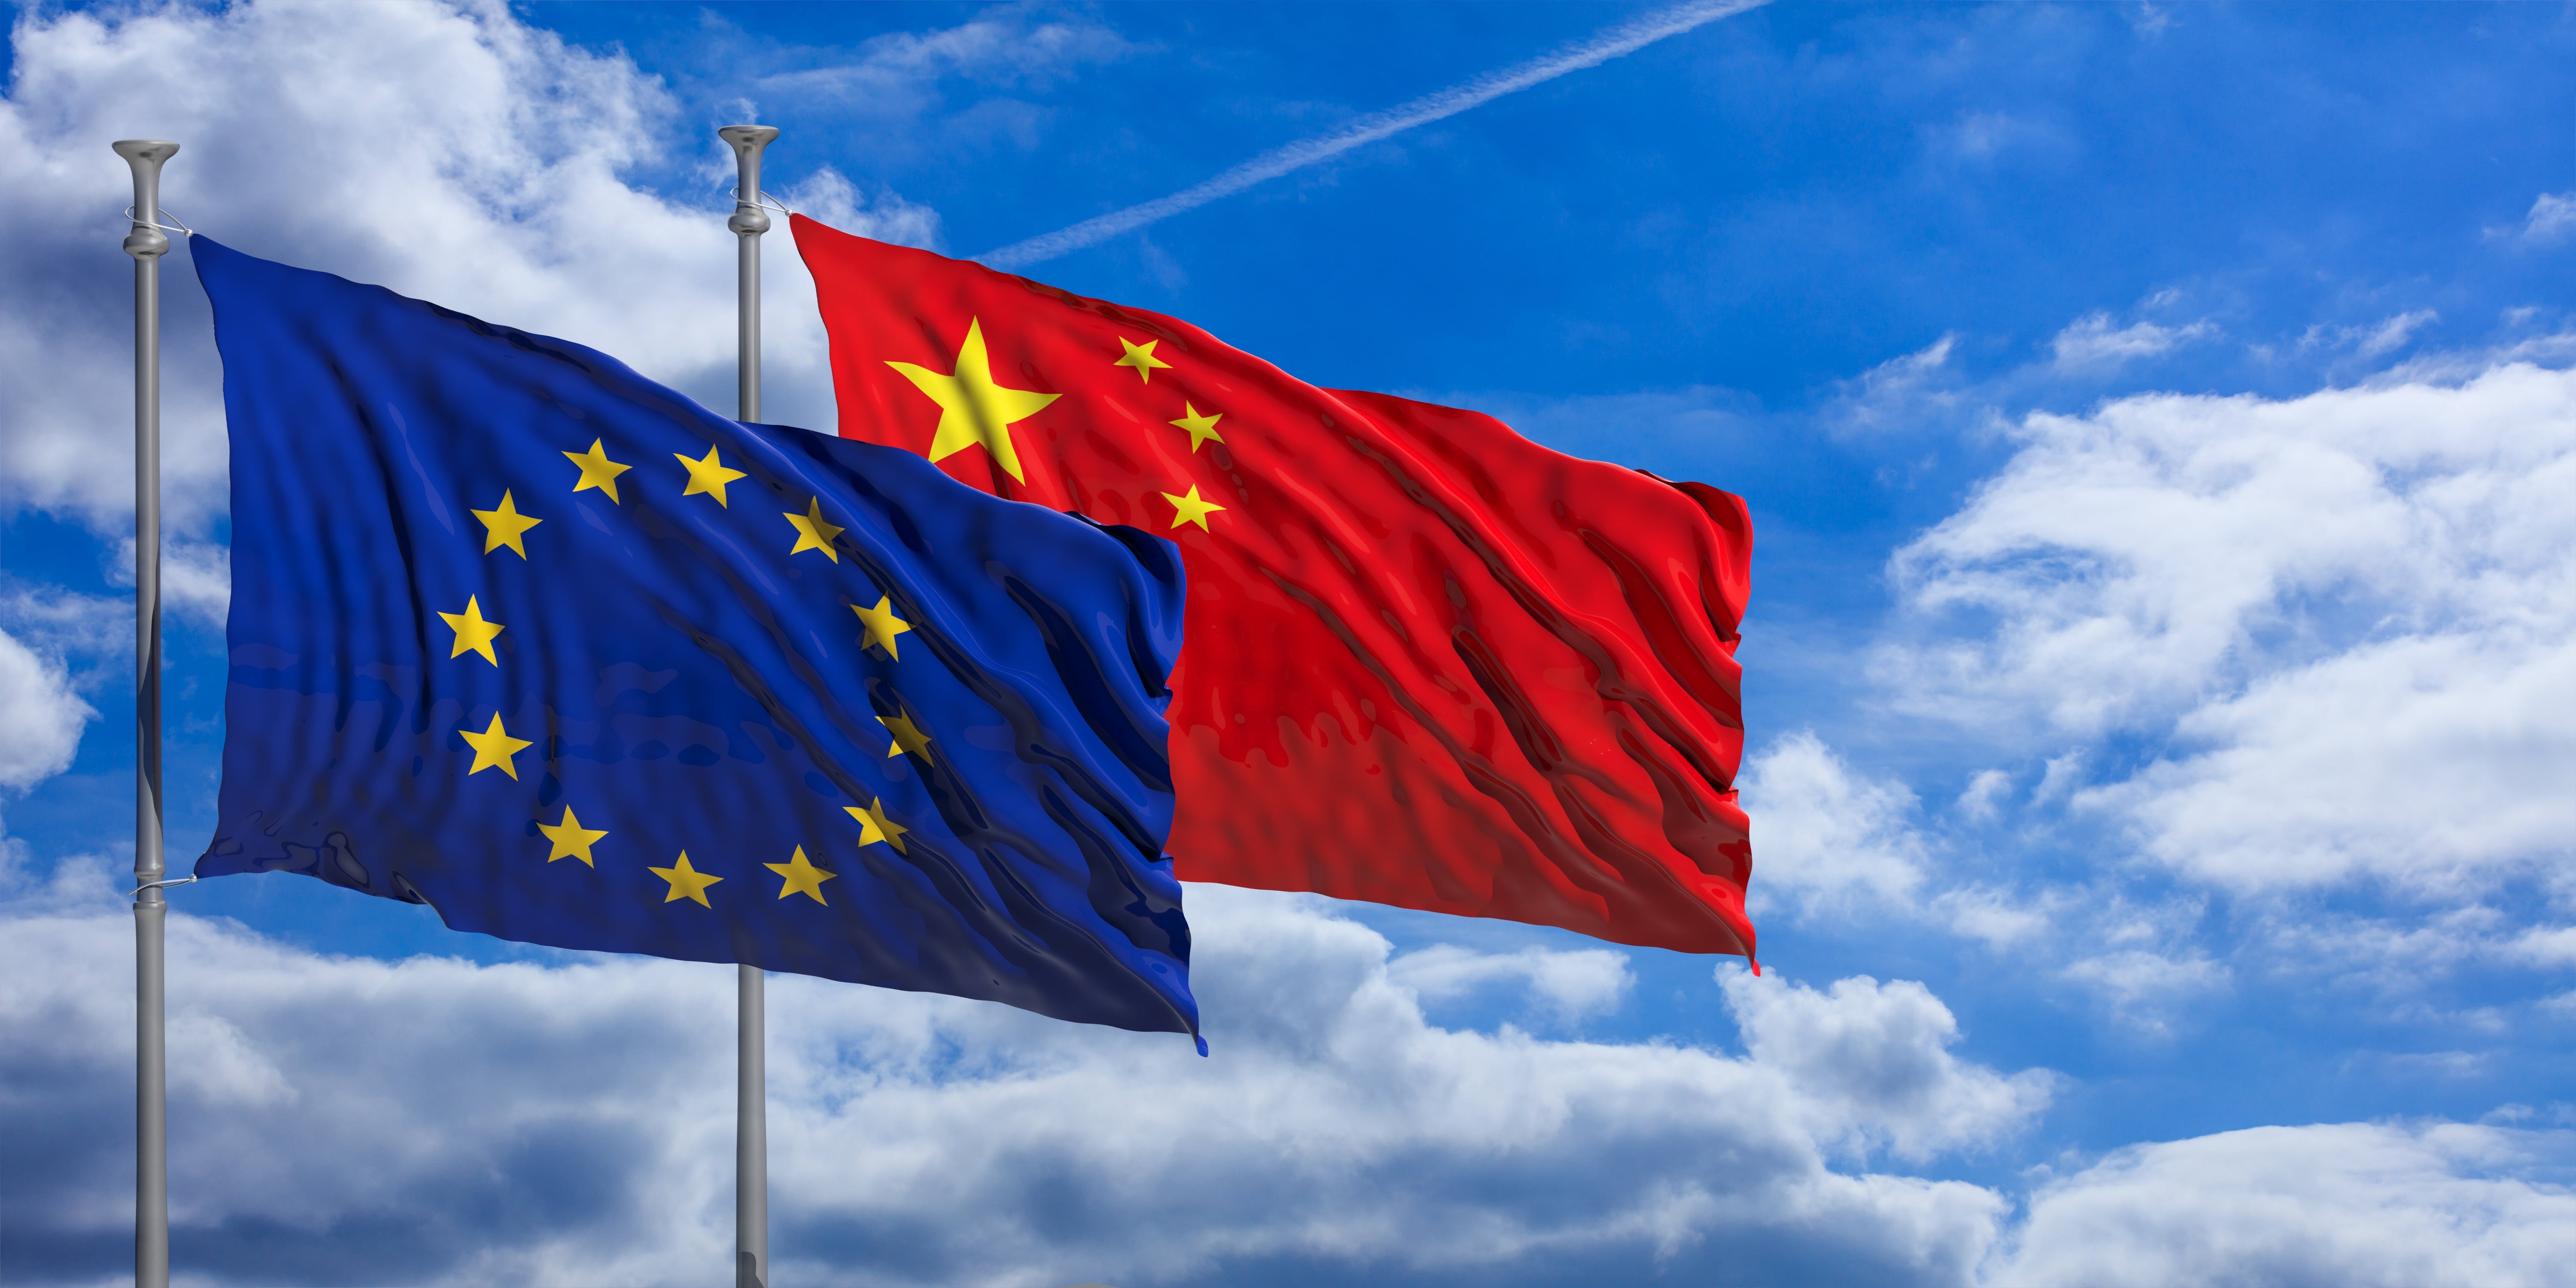 An EU flag and a Chinese flag flapping next to each other in the wind against a light blue sky with white fluffy clouds